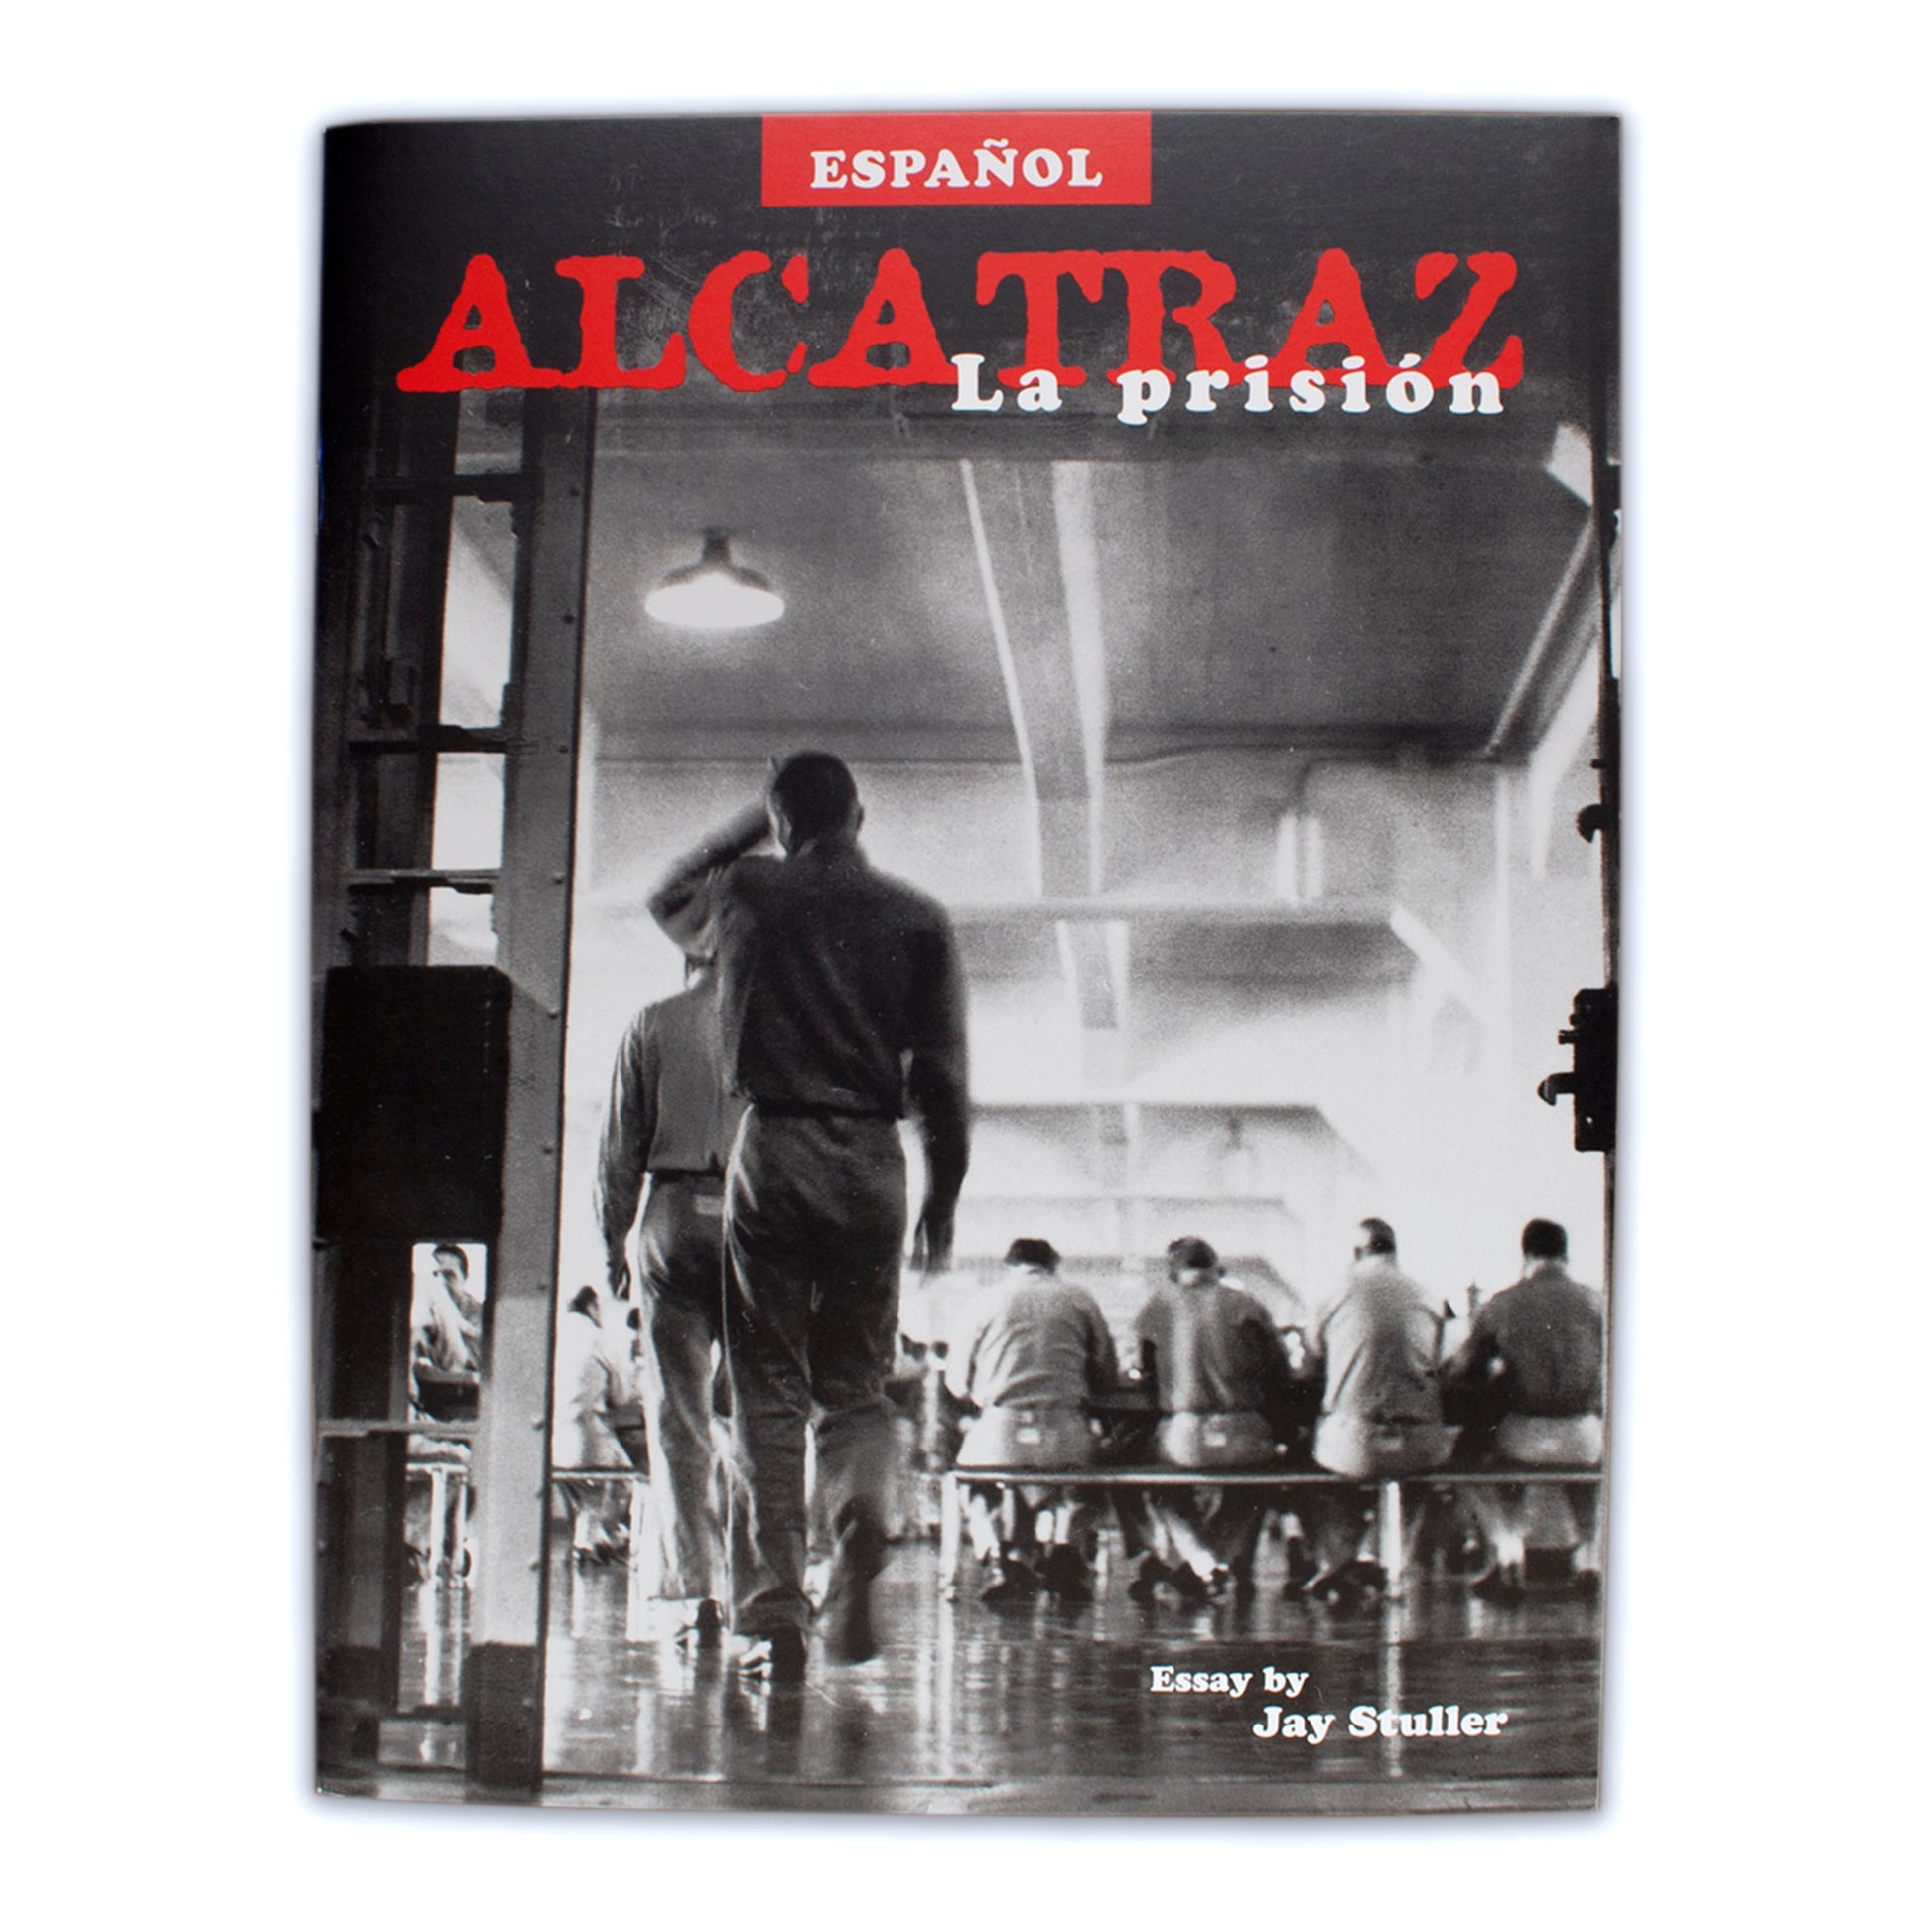 A copy of a Spanish translation of Alcatraz the Prison book by Jay Stuller, a brief history of America's most notorious prison.